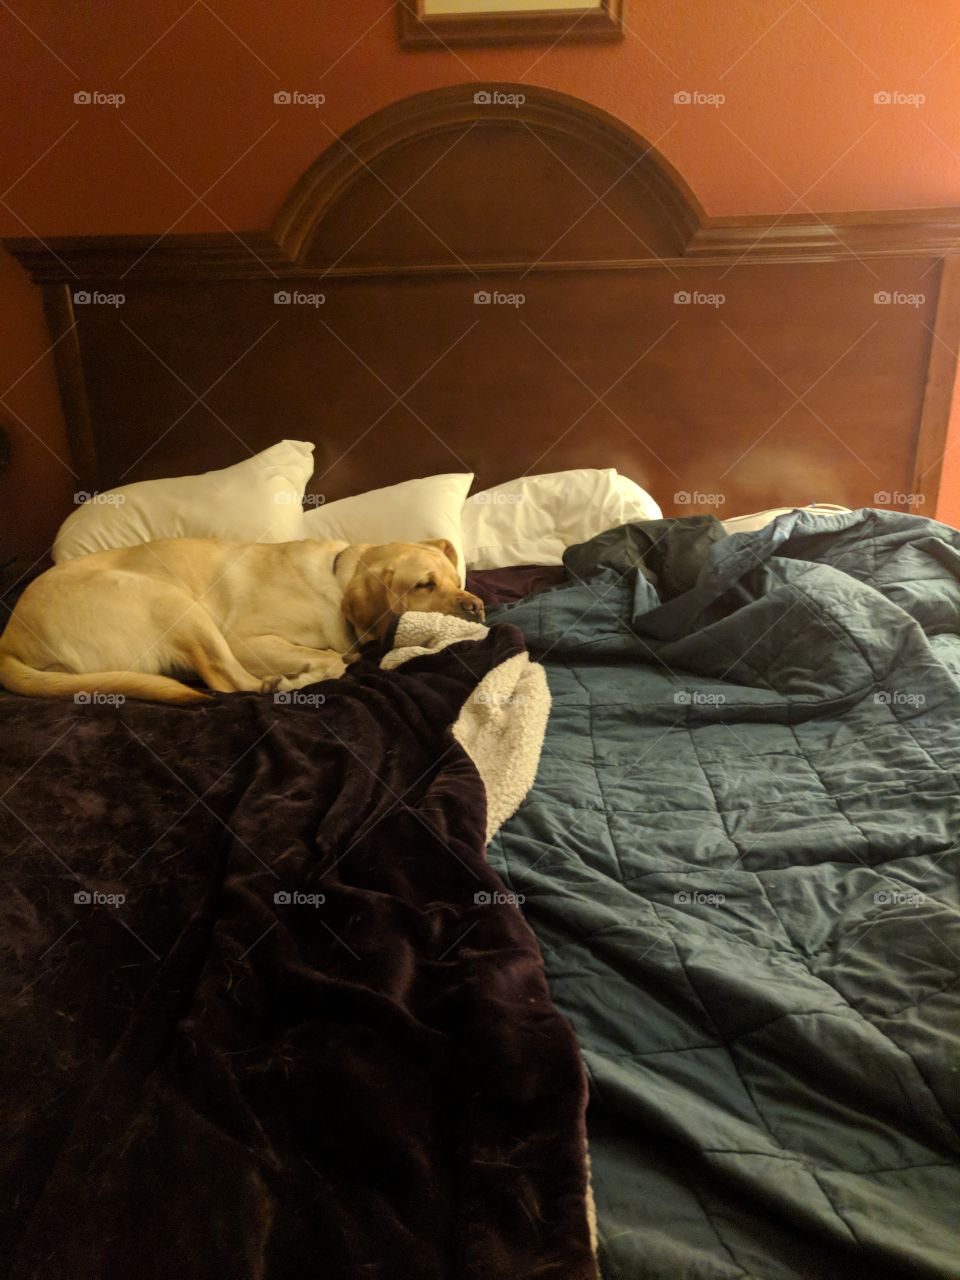 Service Dog On Bed